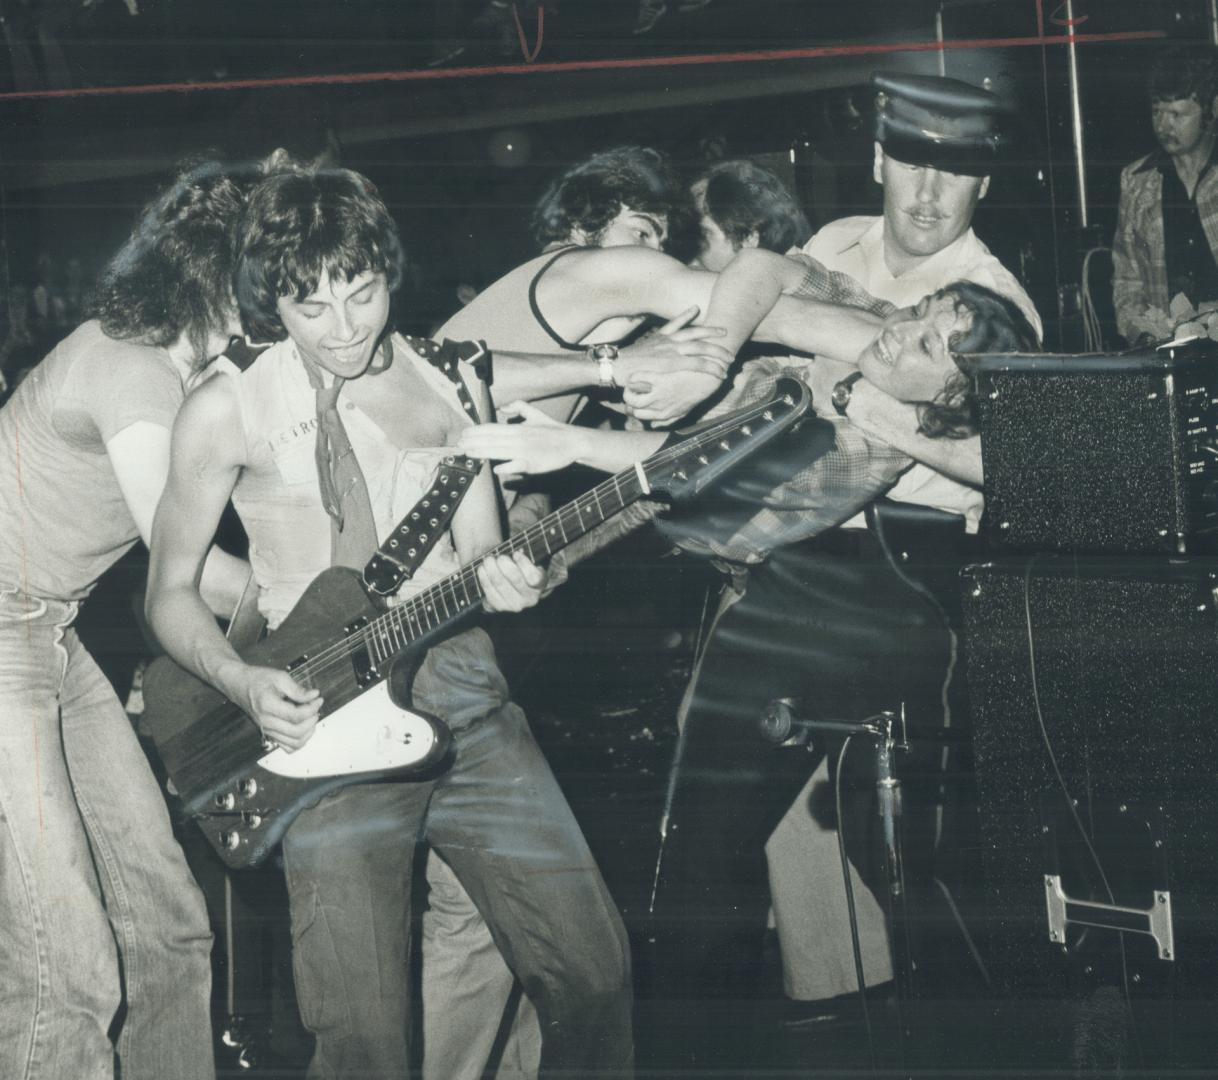 Police had their hands full as they tried to keep frenzied young fans from ex-Bay City Roller guitarist Ian Mitchell (foreground) as he led Rosetta St(...)